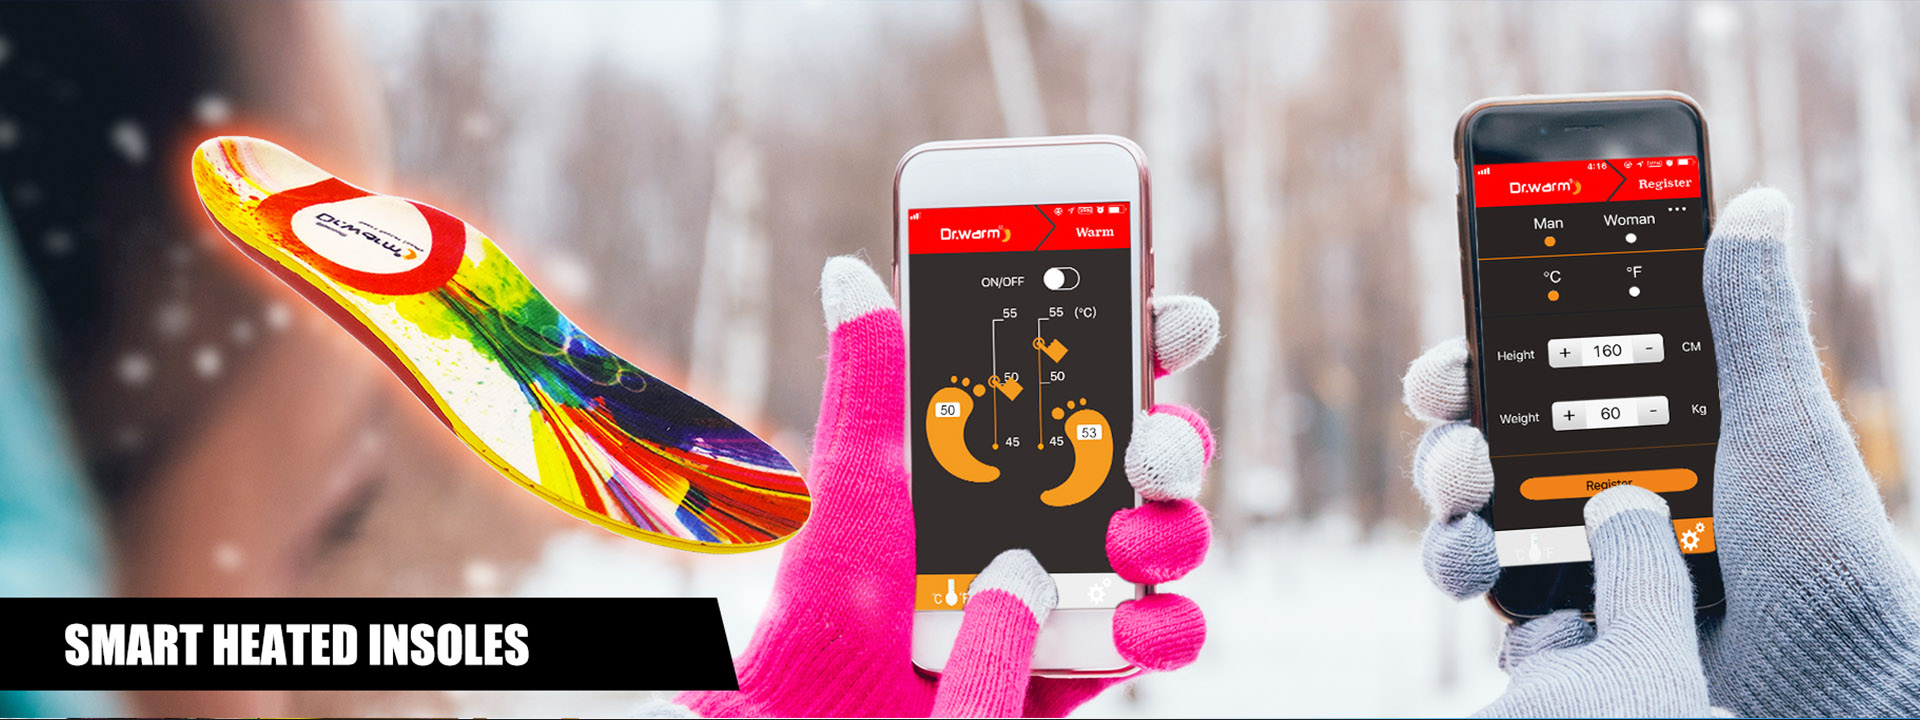 S-King-Manufacturer Of Heated Insoles Smartphone- Controlled Wireless